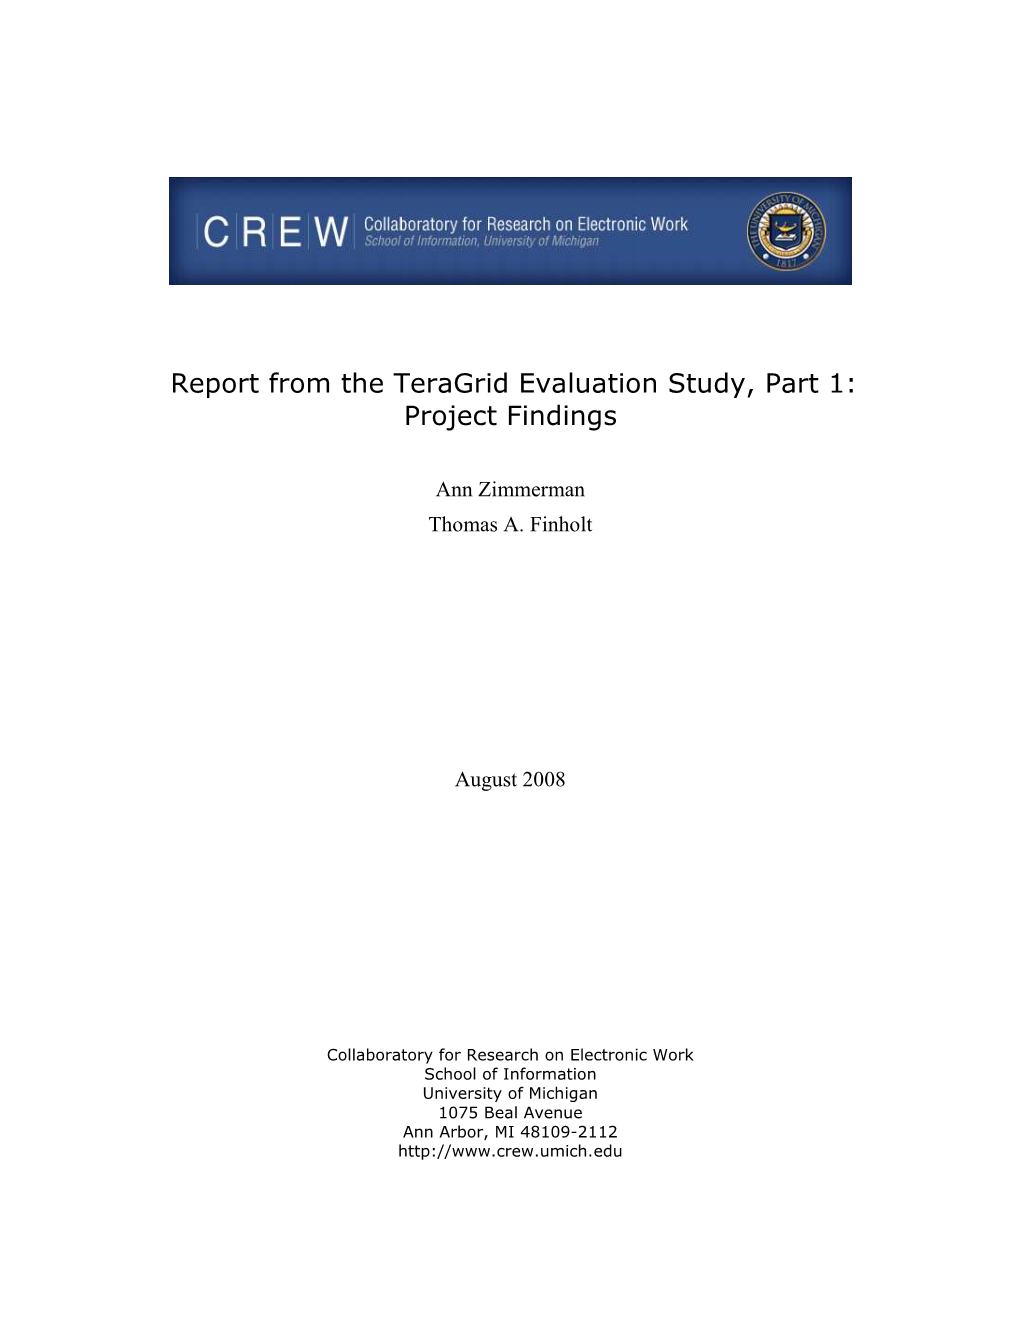 Teragrid Evaluation Report Project Findings August 2008